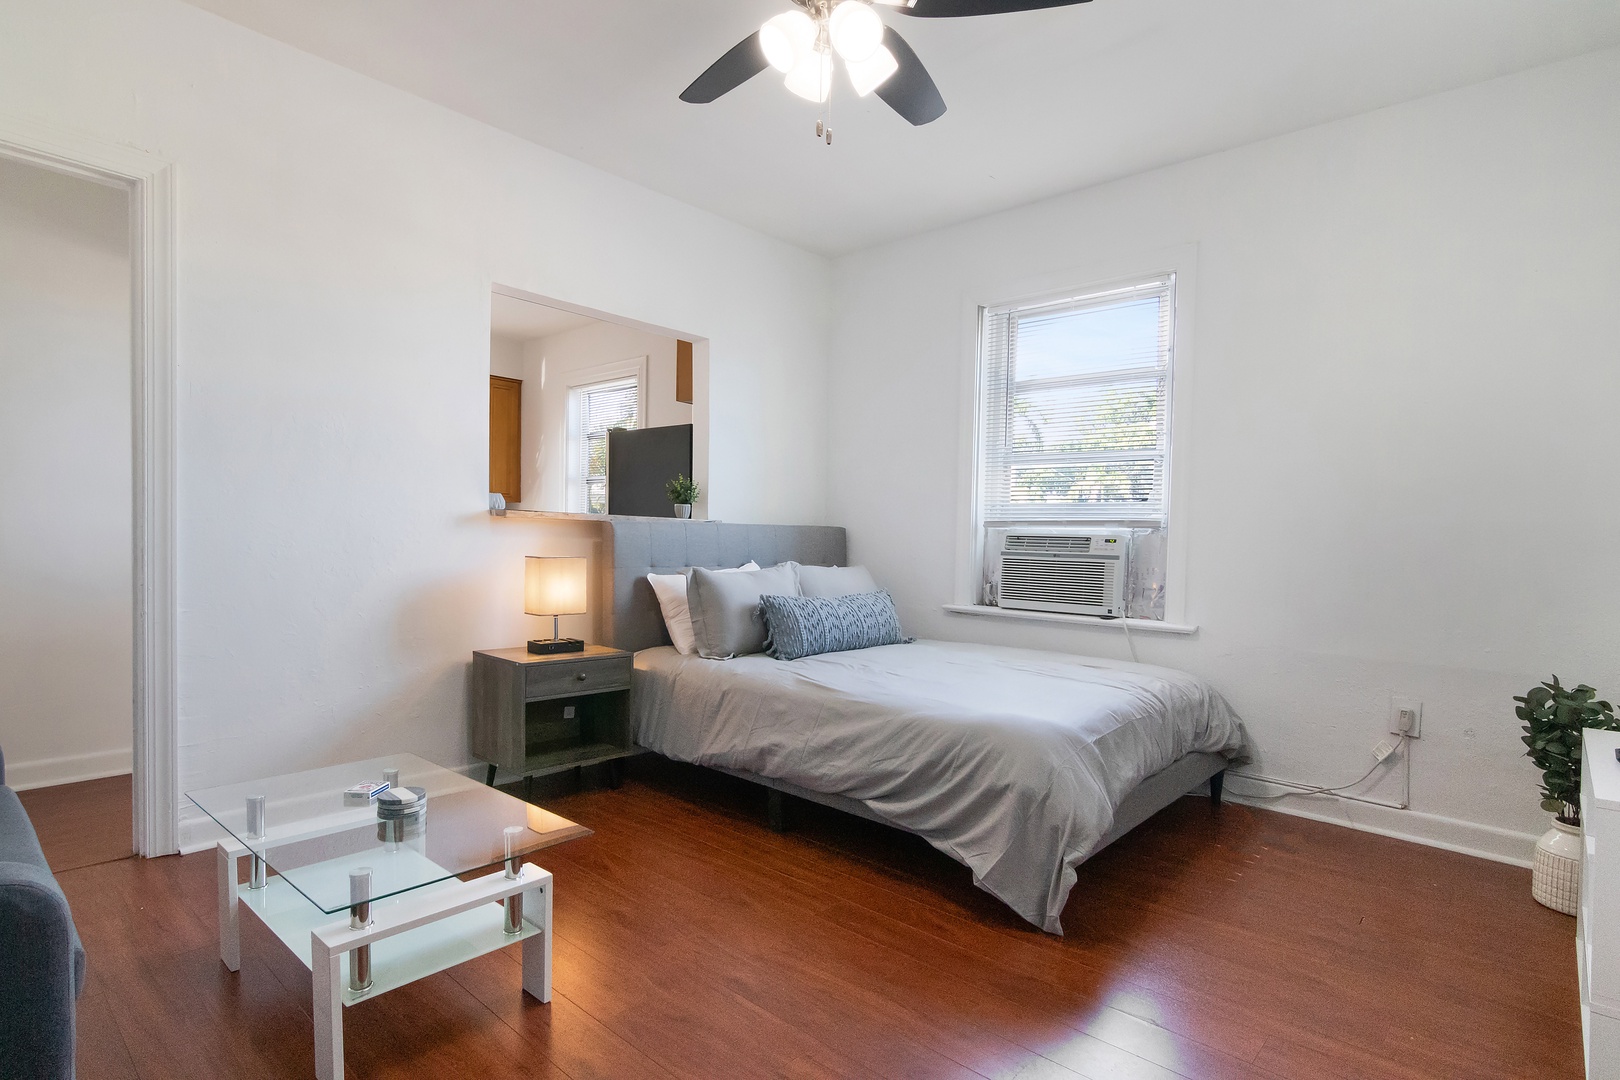 This cozy Living/Sleeping Area offers a Queen Bed and Smart TV with Window AC